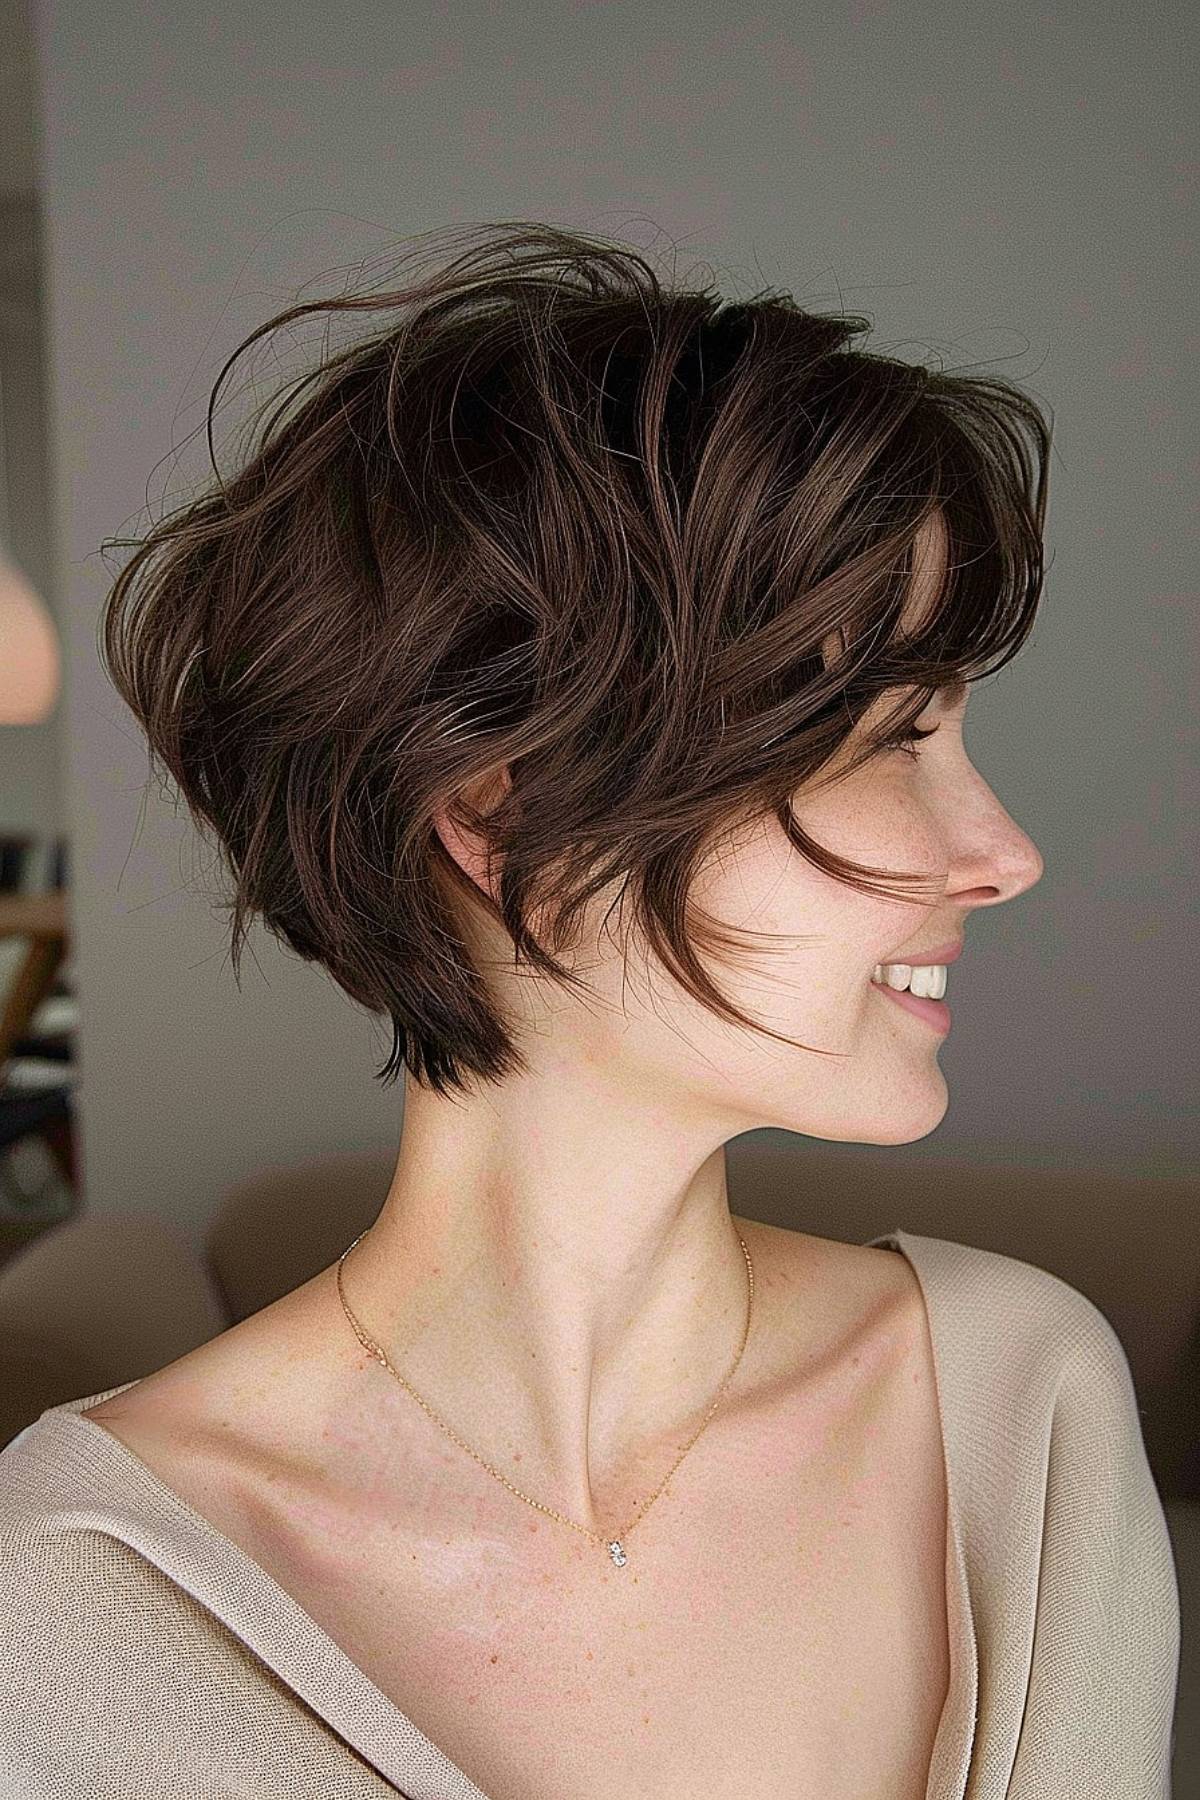 A woman with a playfully angled pixie cut, featuring 3D irregular layers that give the look a textured and lively appearance.